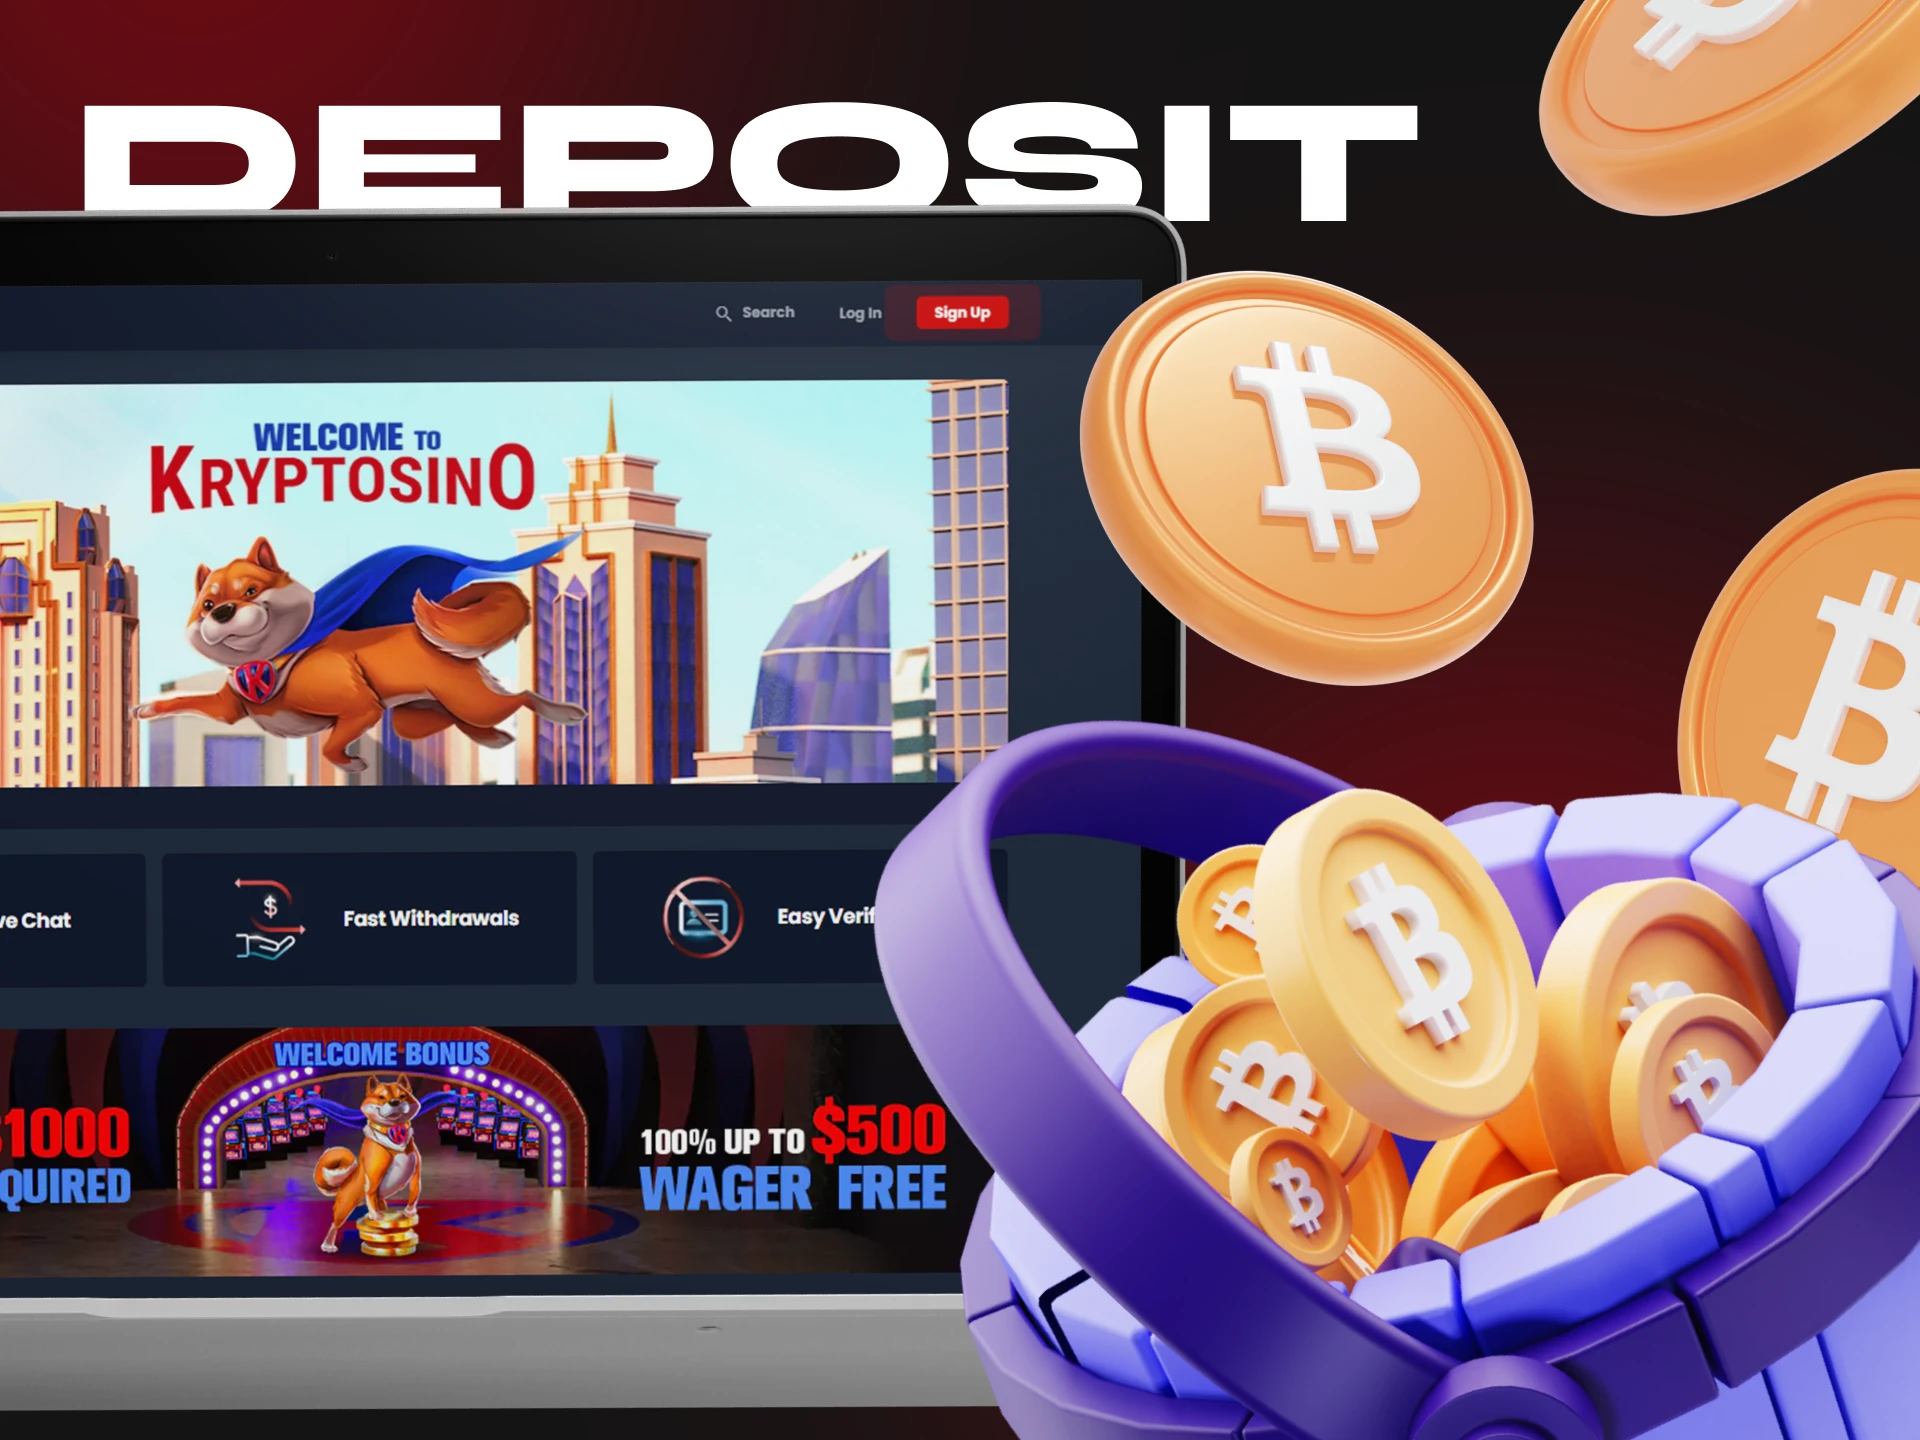 Make a deposit to Kryptosino casino by following these instructions.